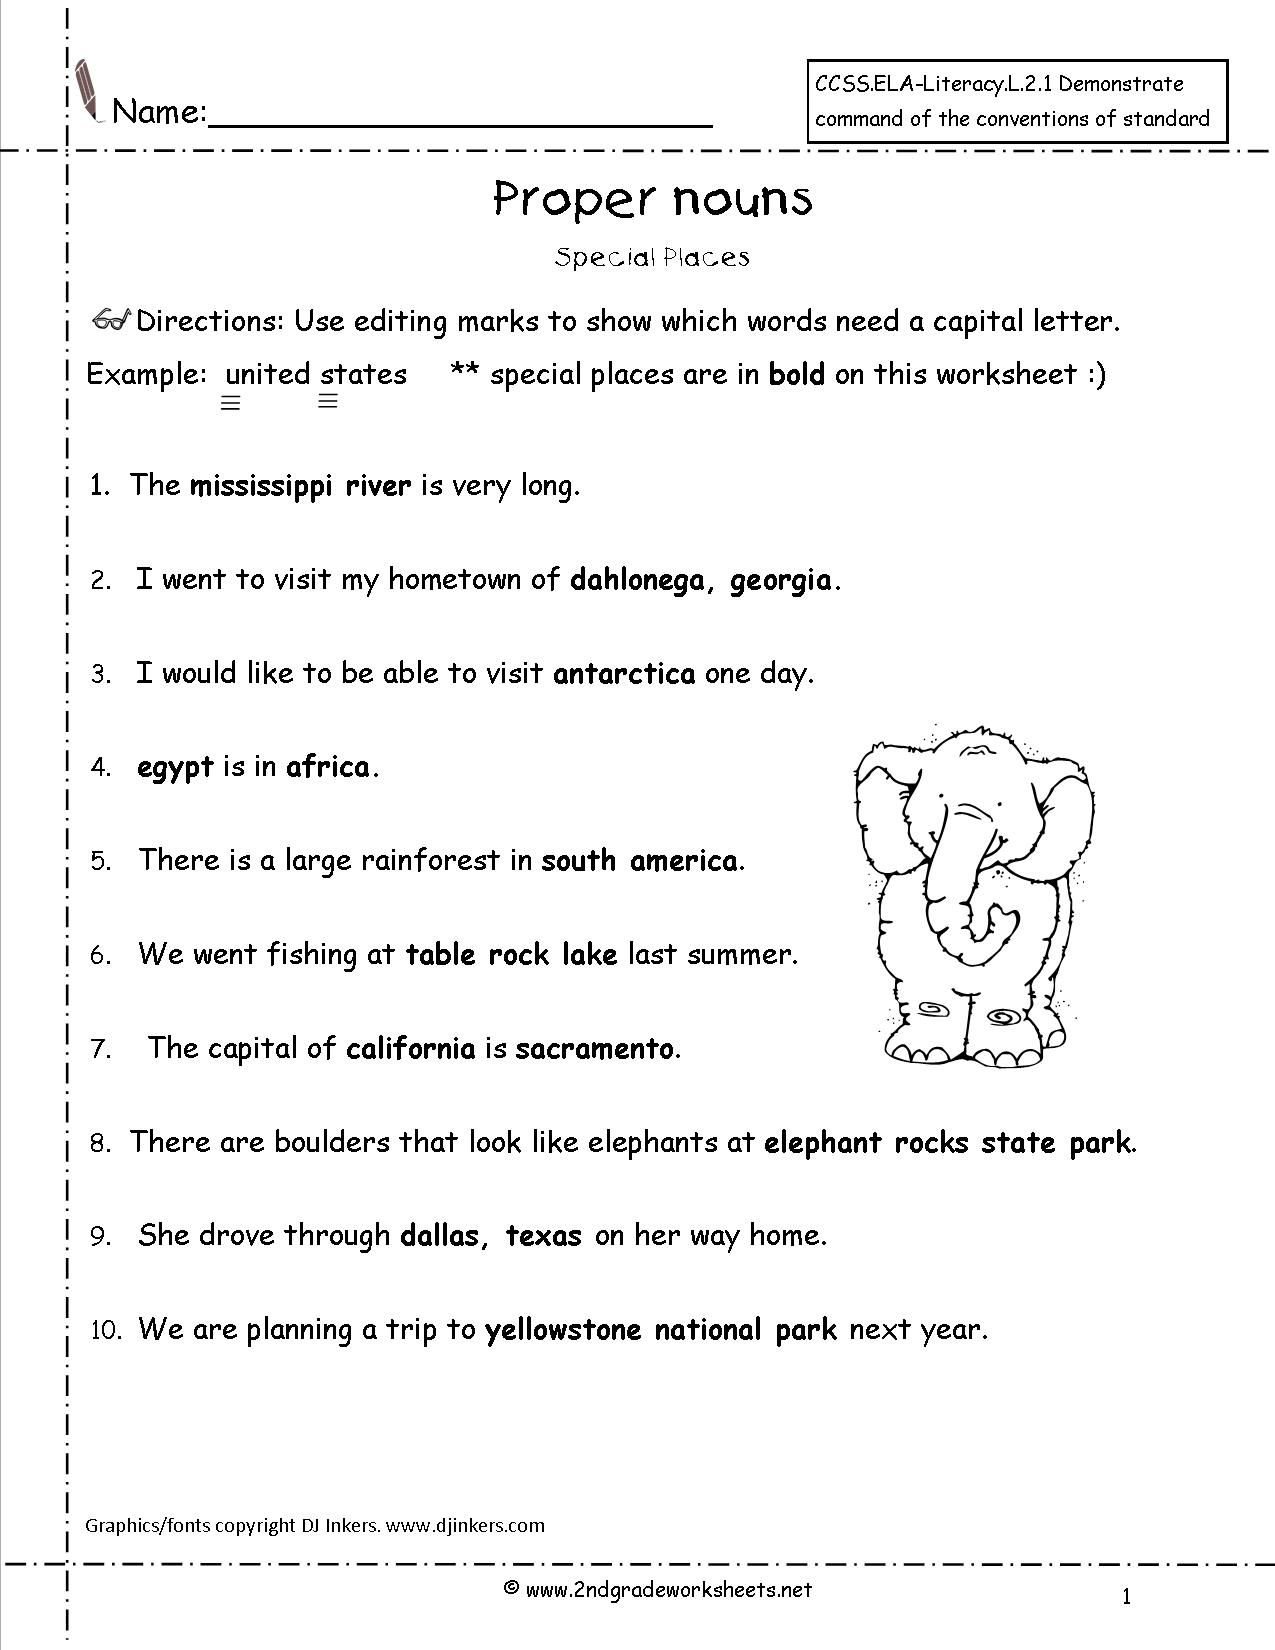 Games Cool Common And Proper Nouns Worksheets For Grade 4 Ideas